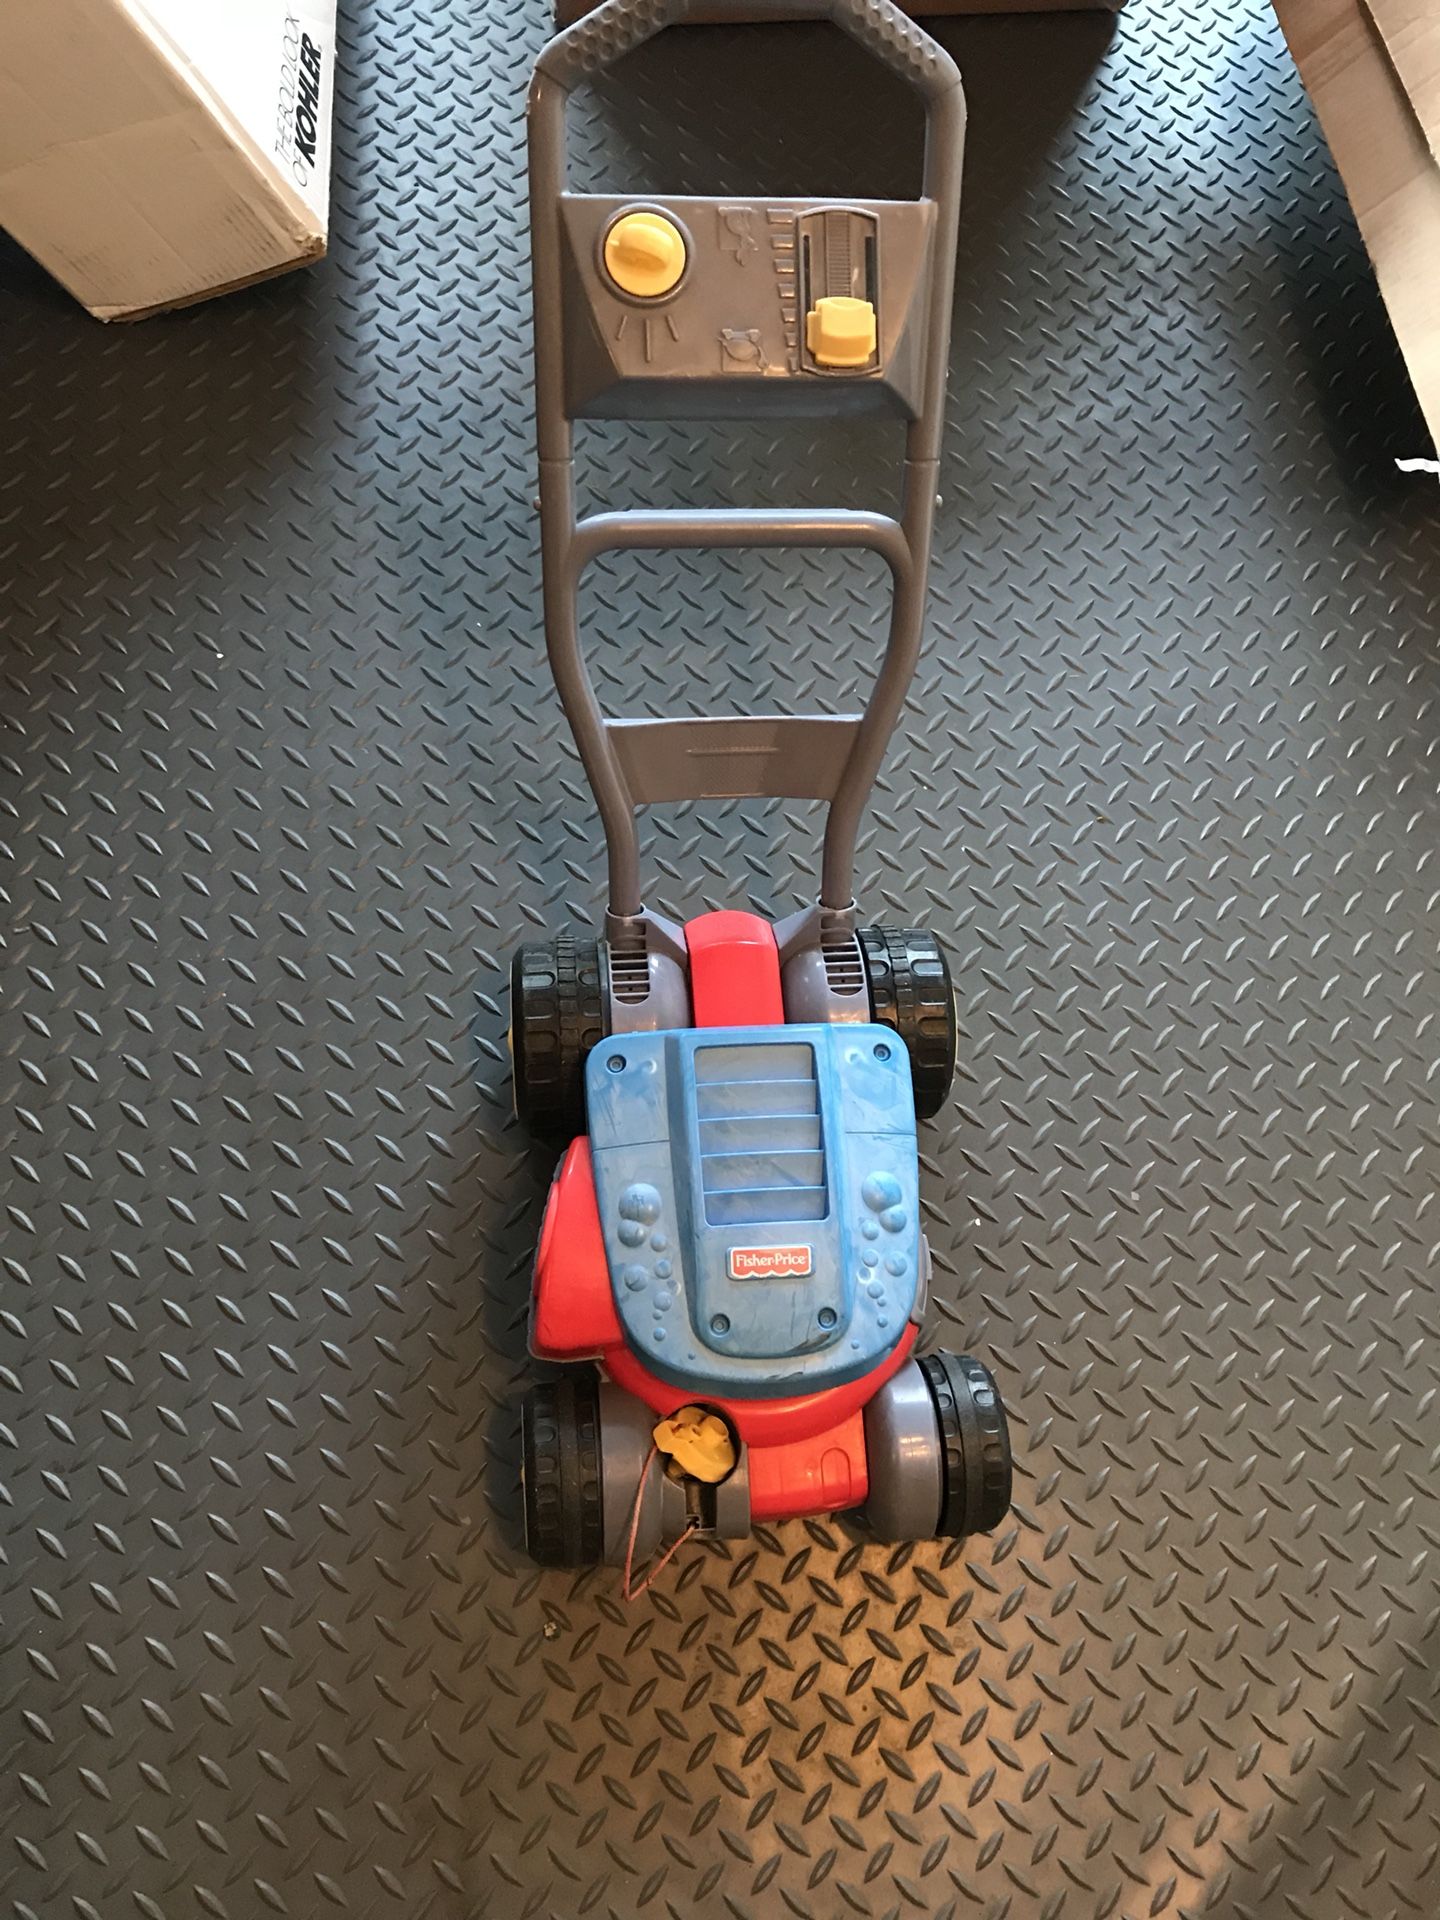 Kids toy lawn mower push toy or any toy $5